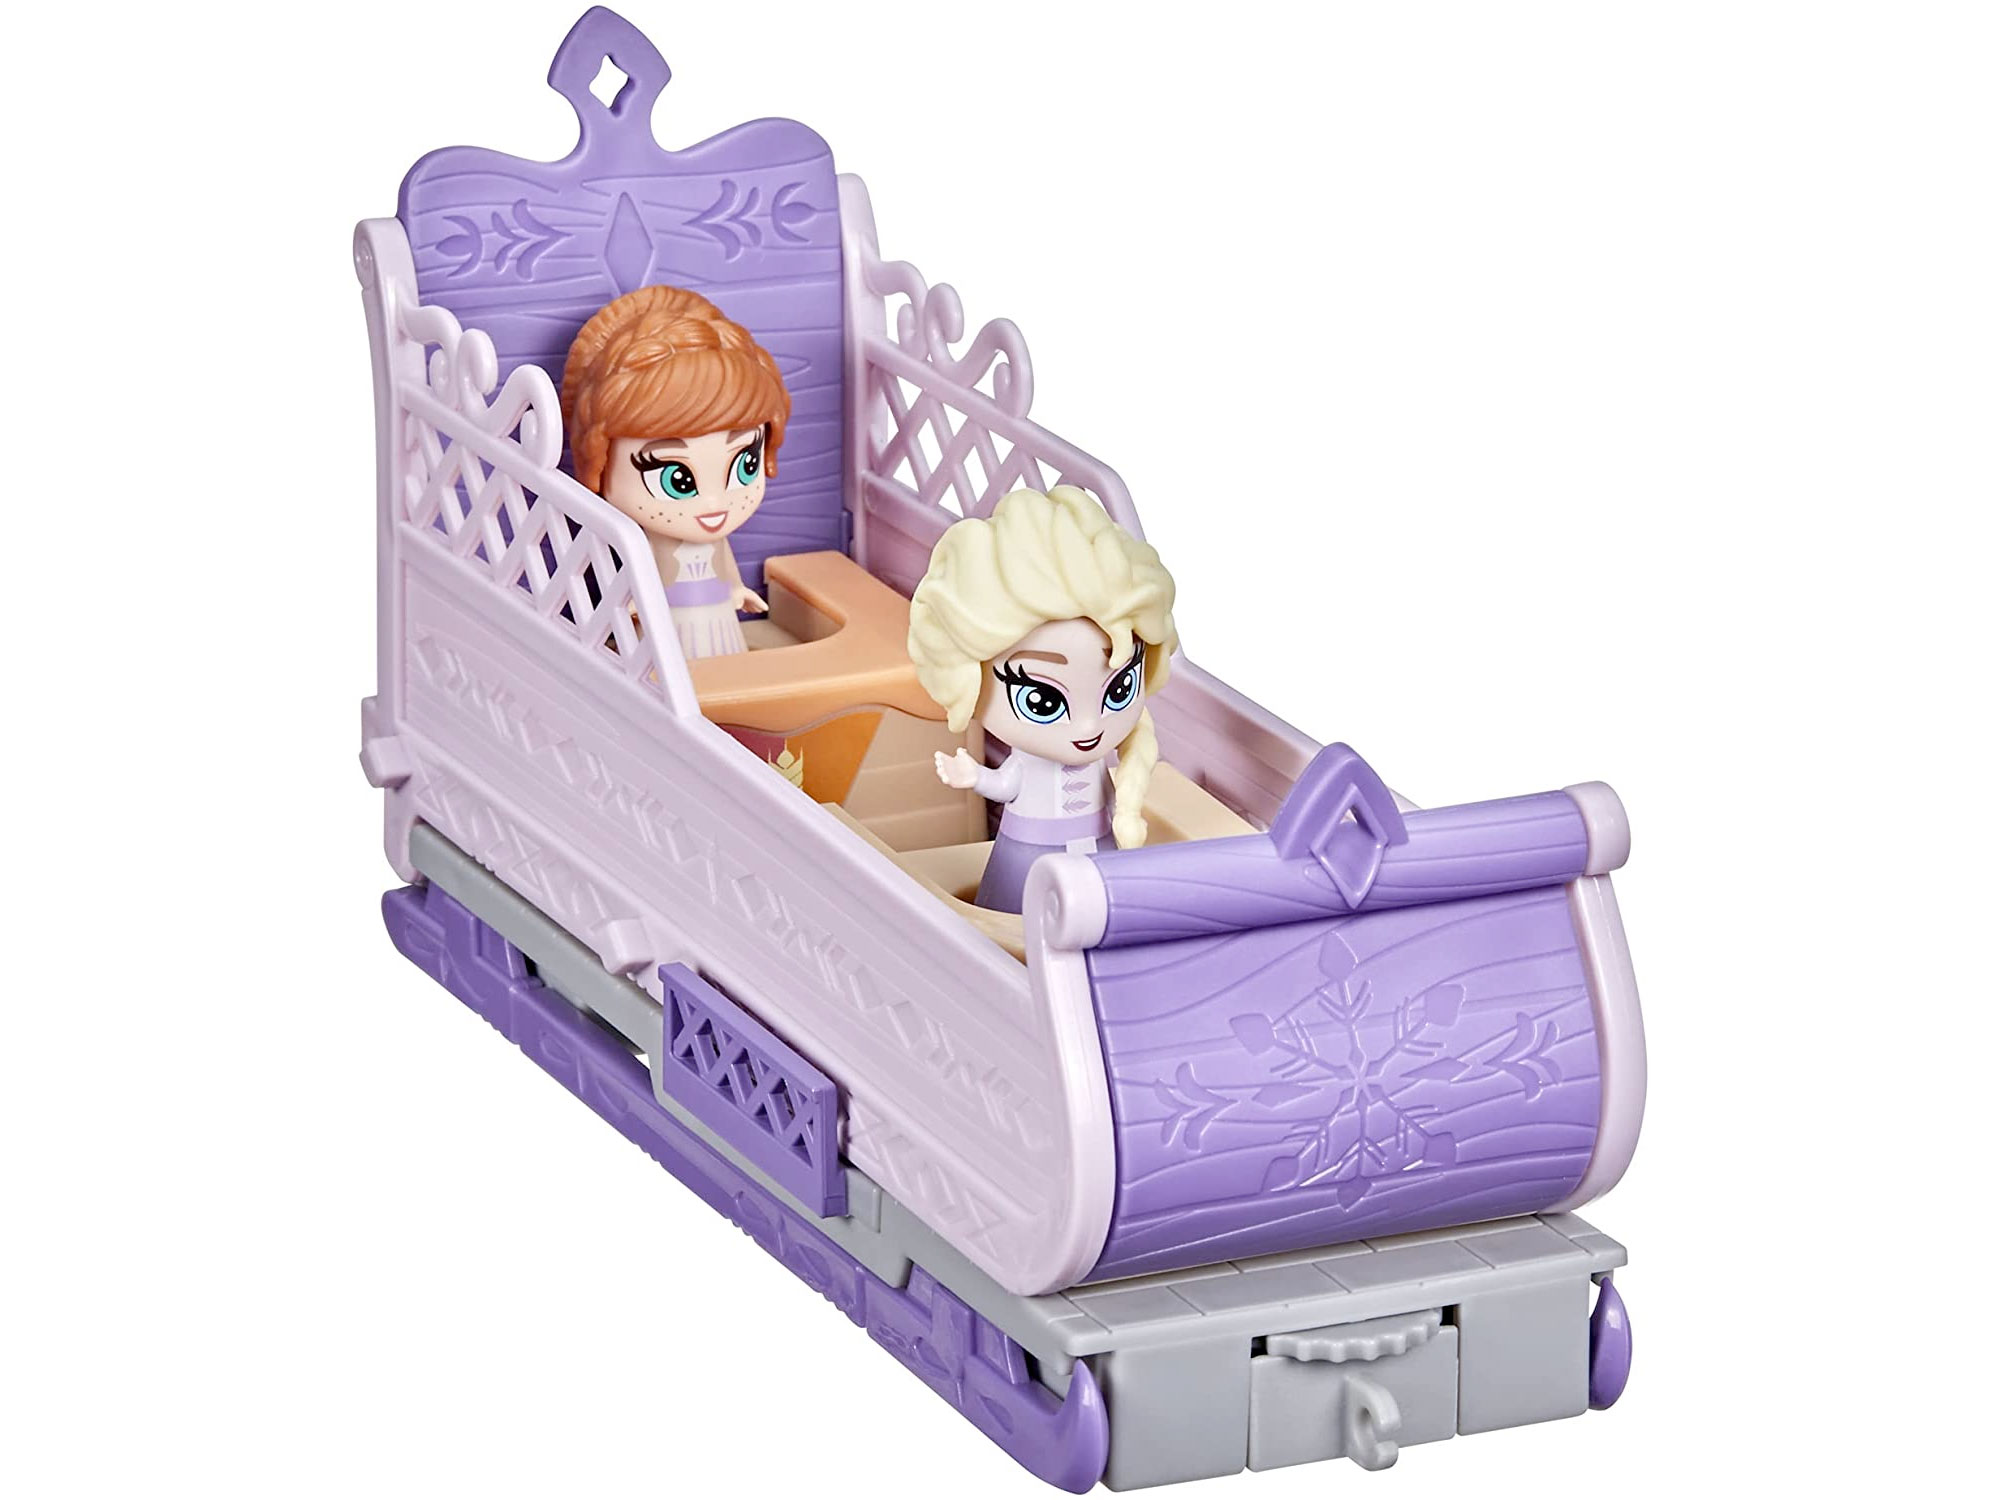 Amazon：Hasbro Disney’s Frozen 2 Twirlabouts Picnic Playset Sled-to-Castle with Elsa and Anna Dolls只賣$13.79